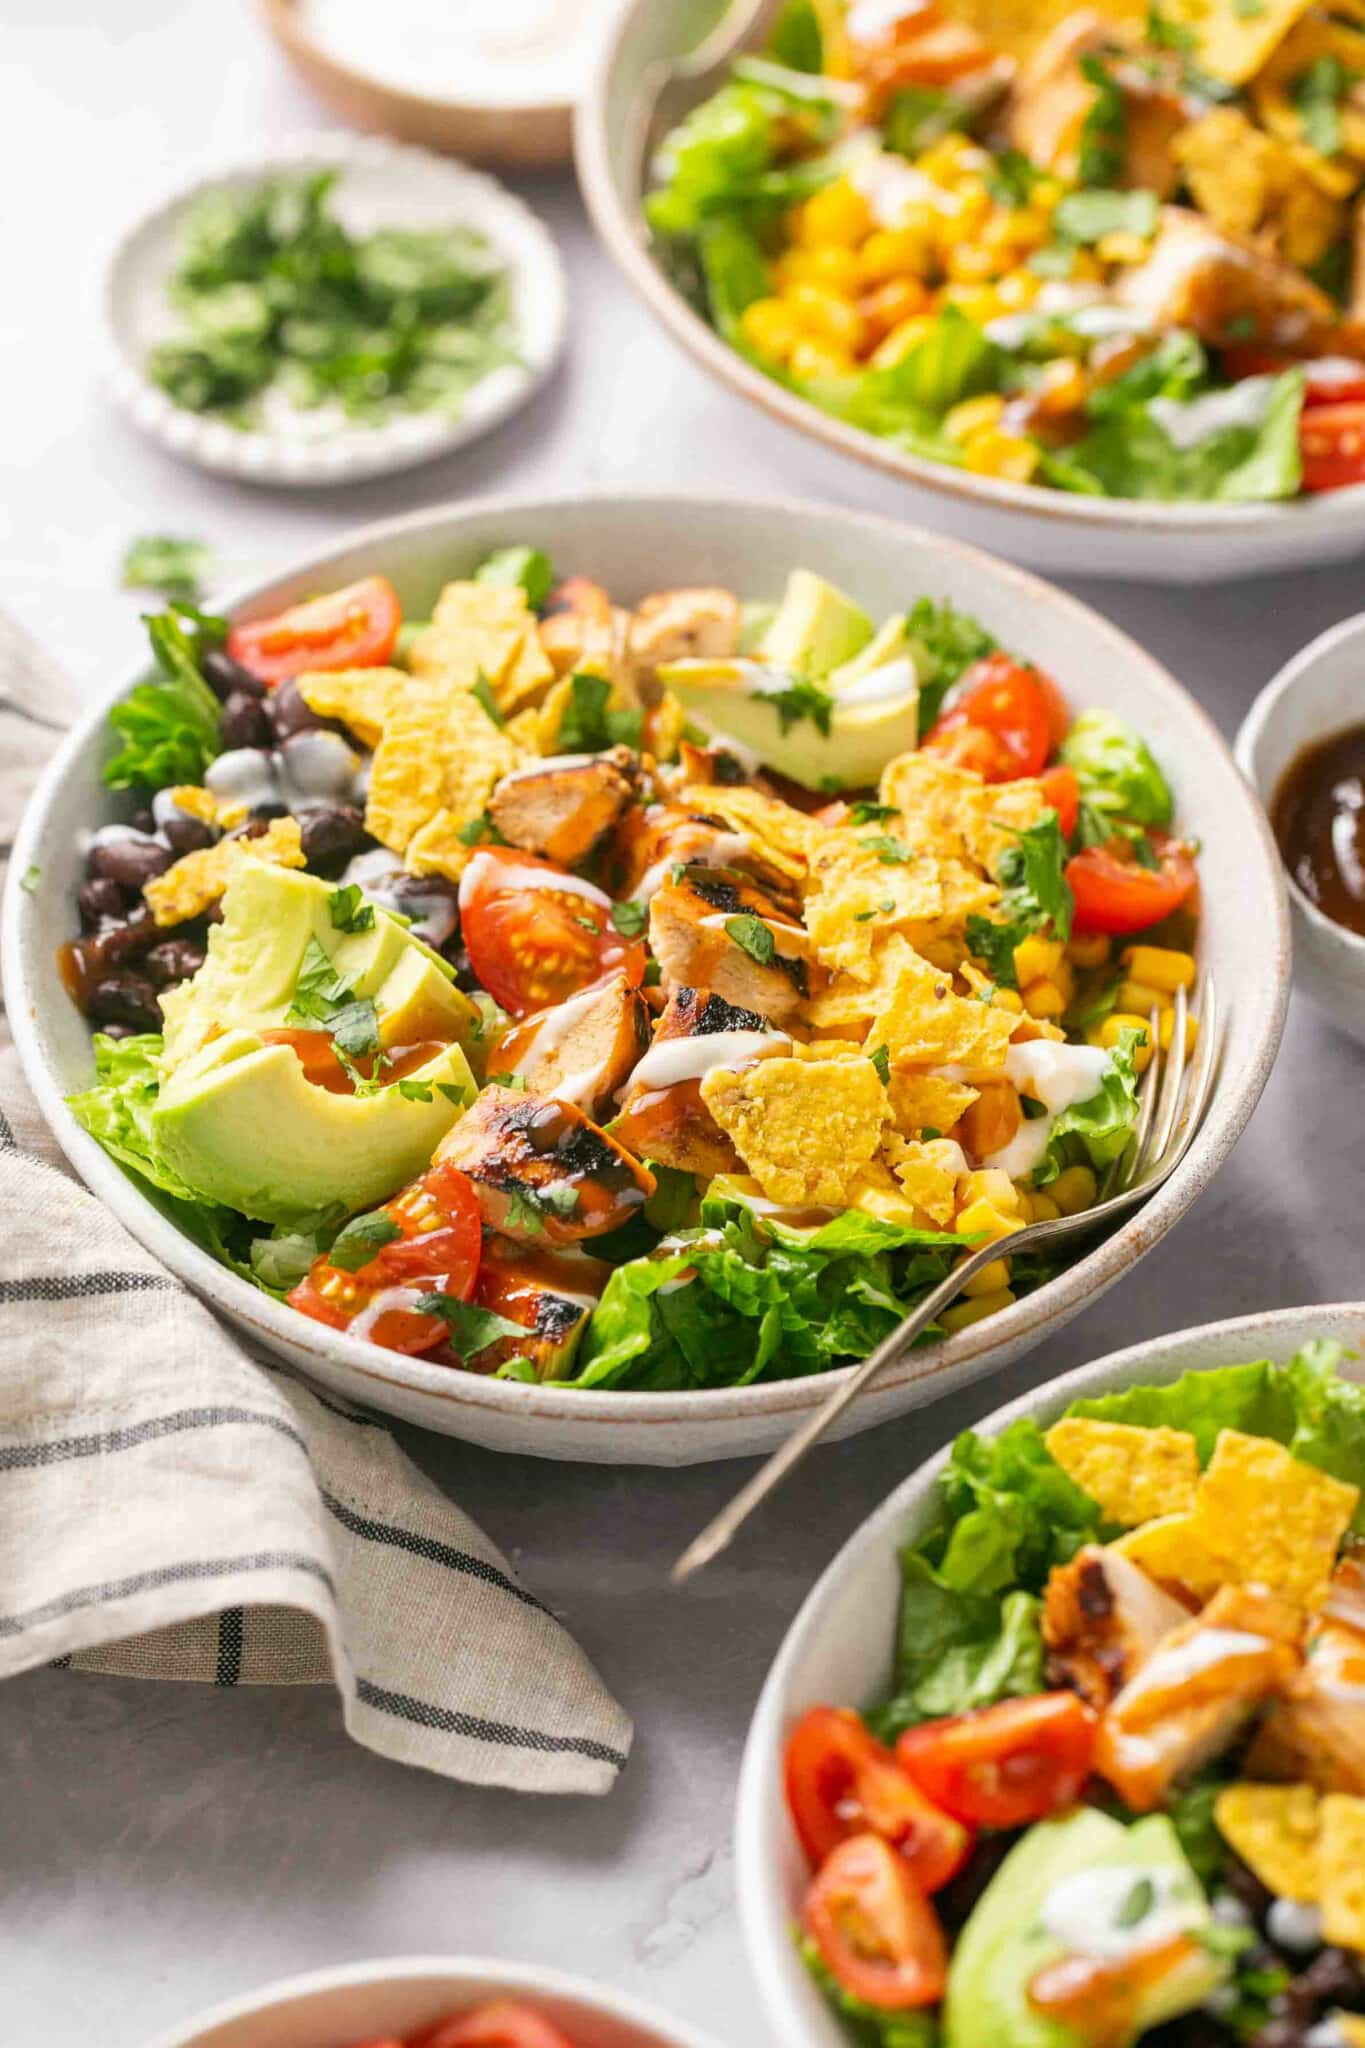 Chicken salad with tomatoes, black beans and corn.